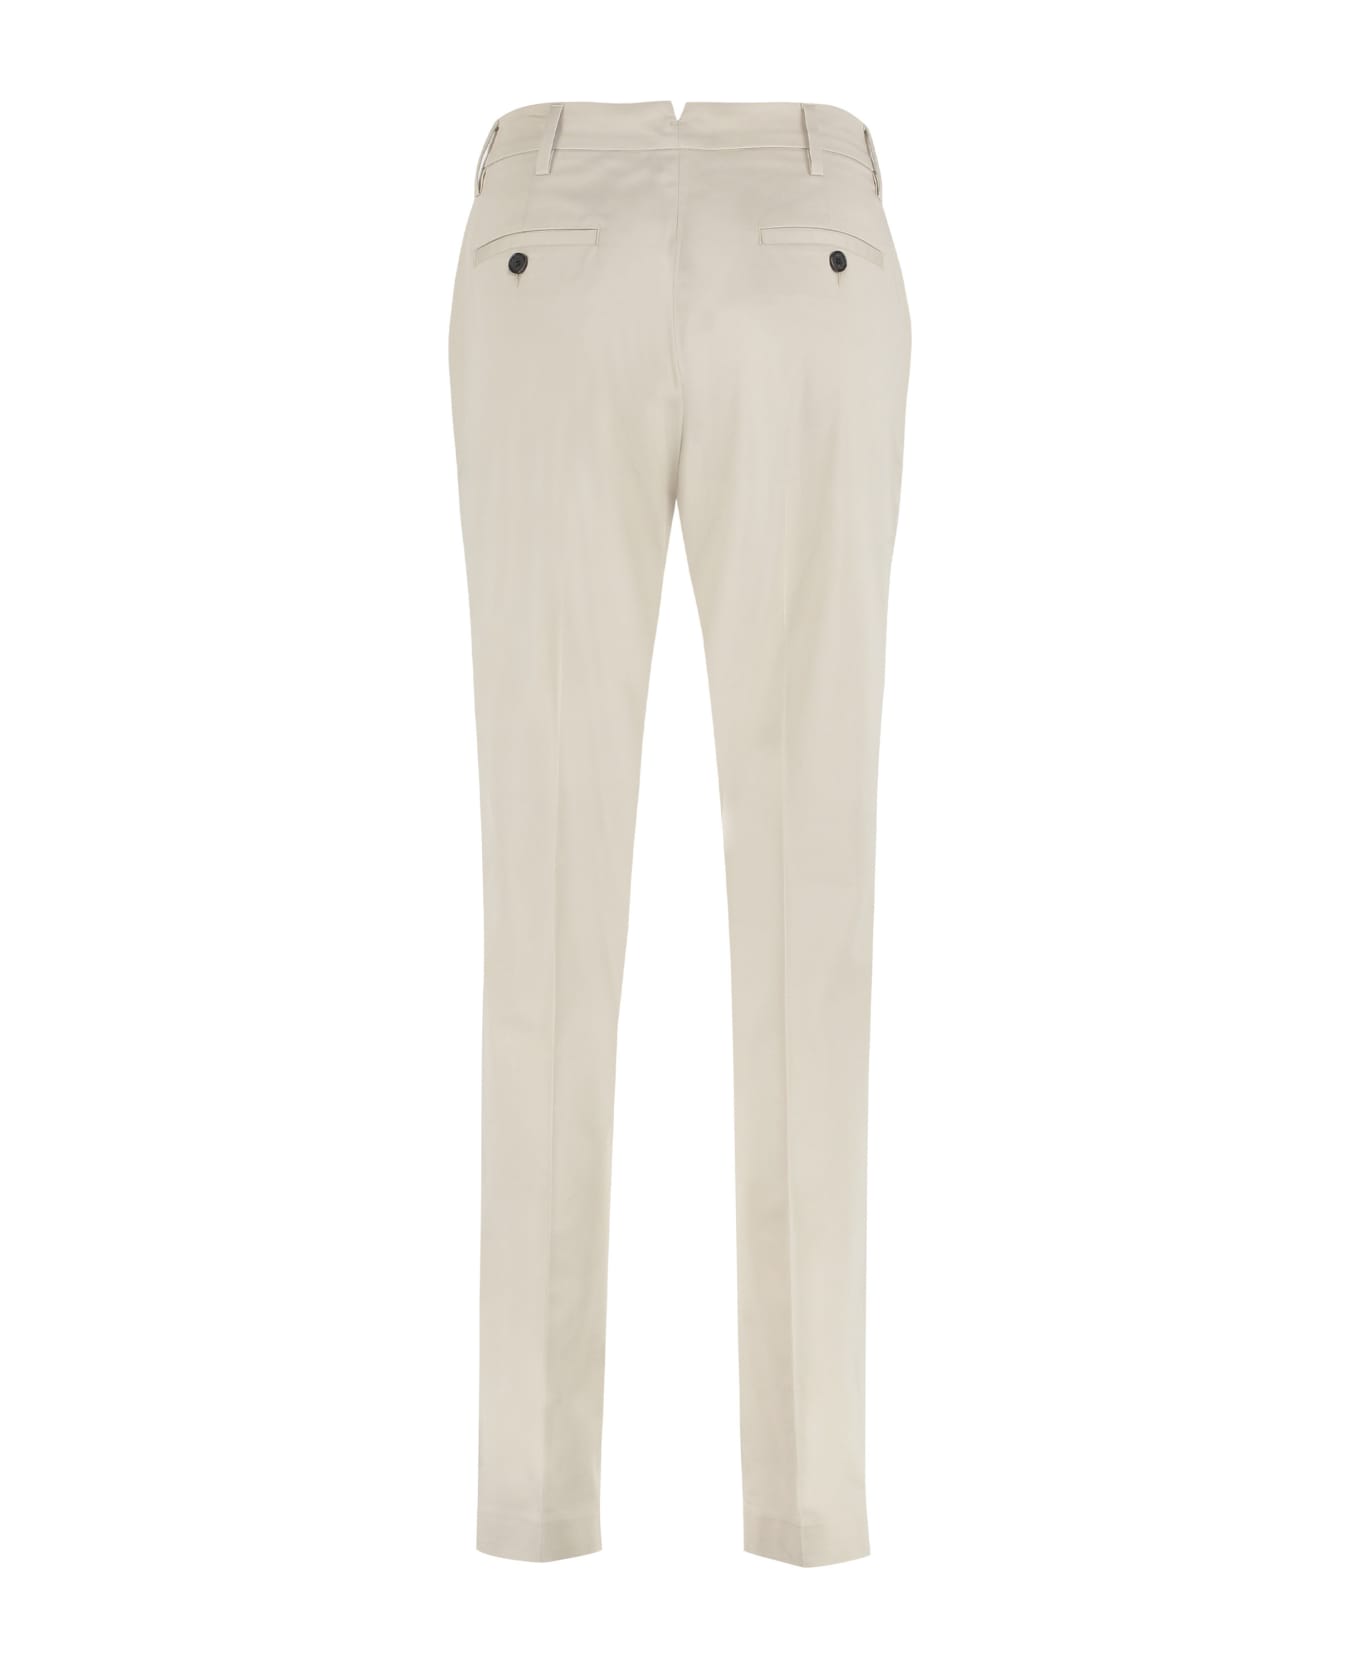 Department Five Stretch Cotton Trousers - Beige ボトムス